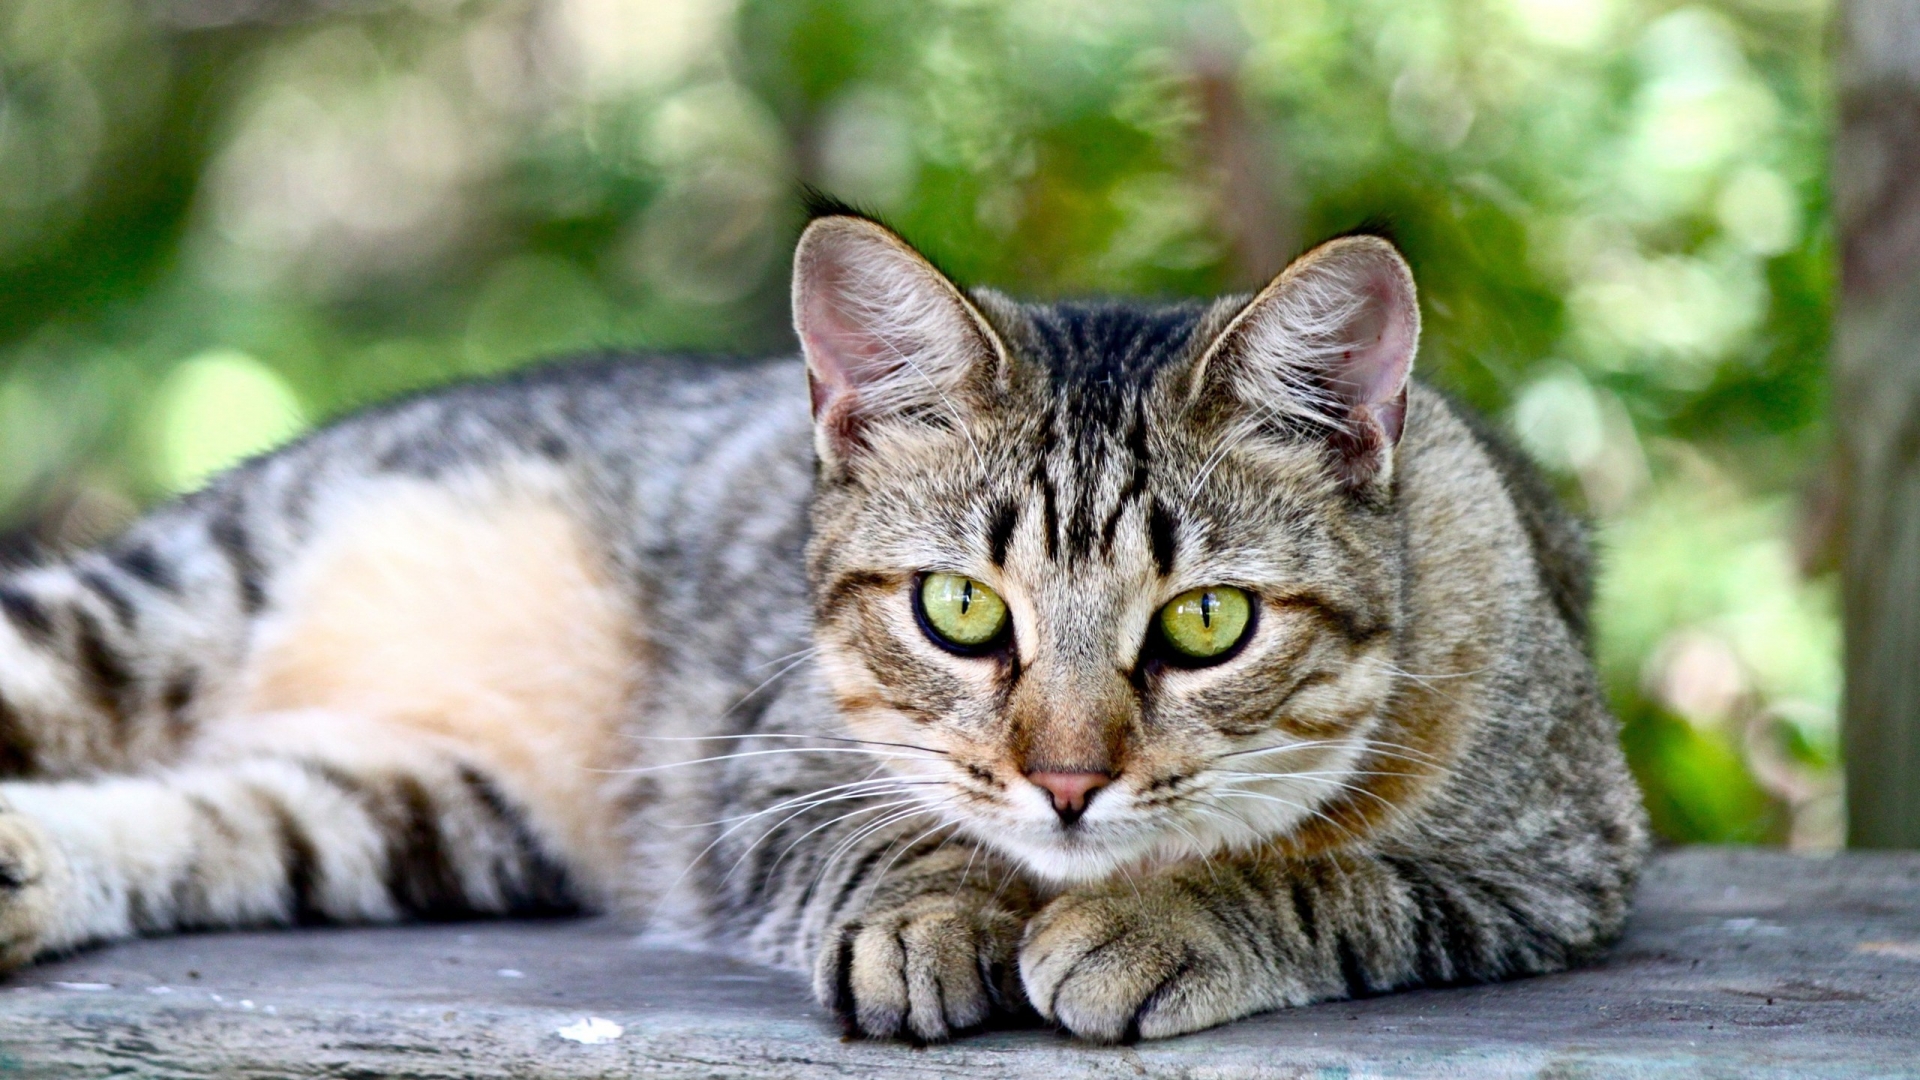 American Shorthair Sitting on Wooden Table for 1920 x 1080 HDTV 1080p resolution